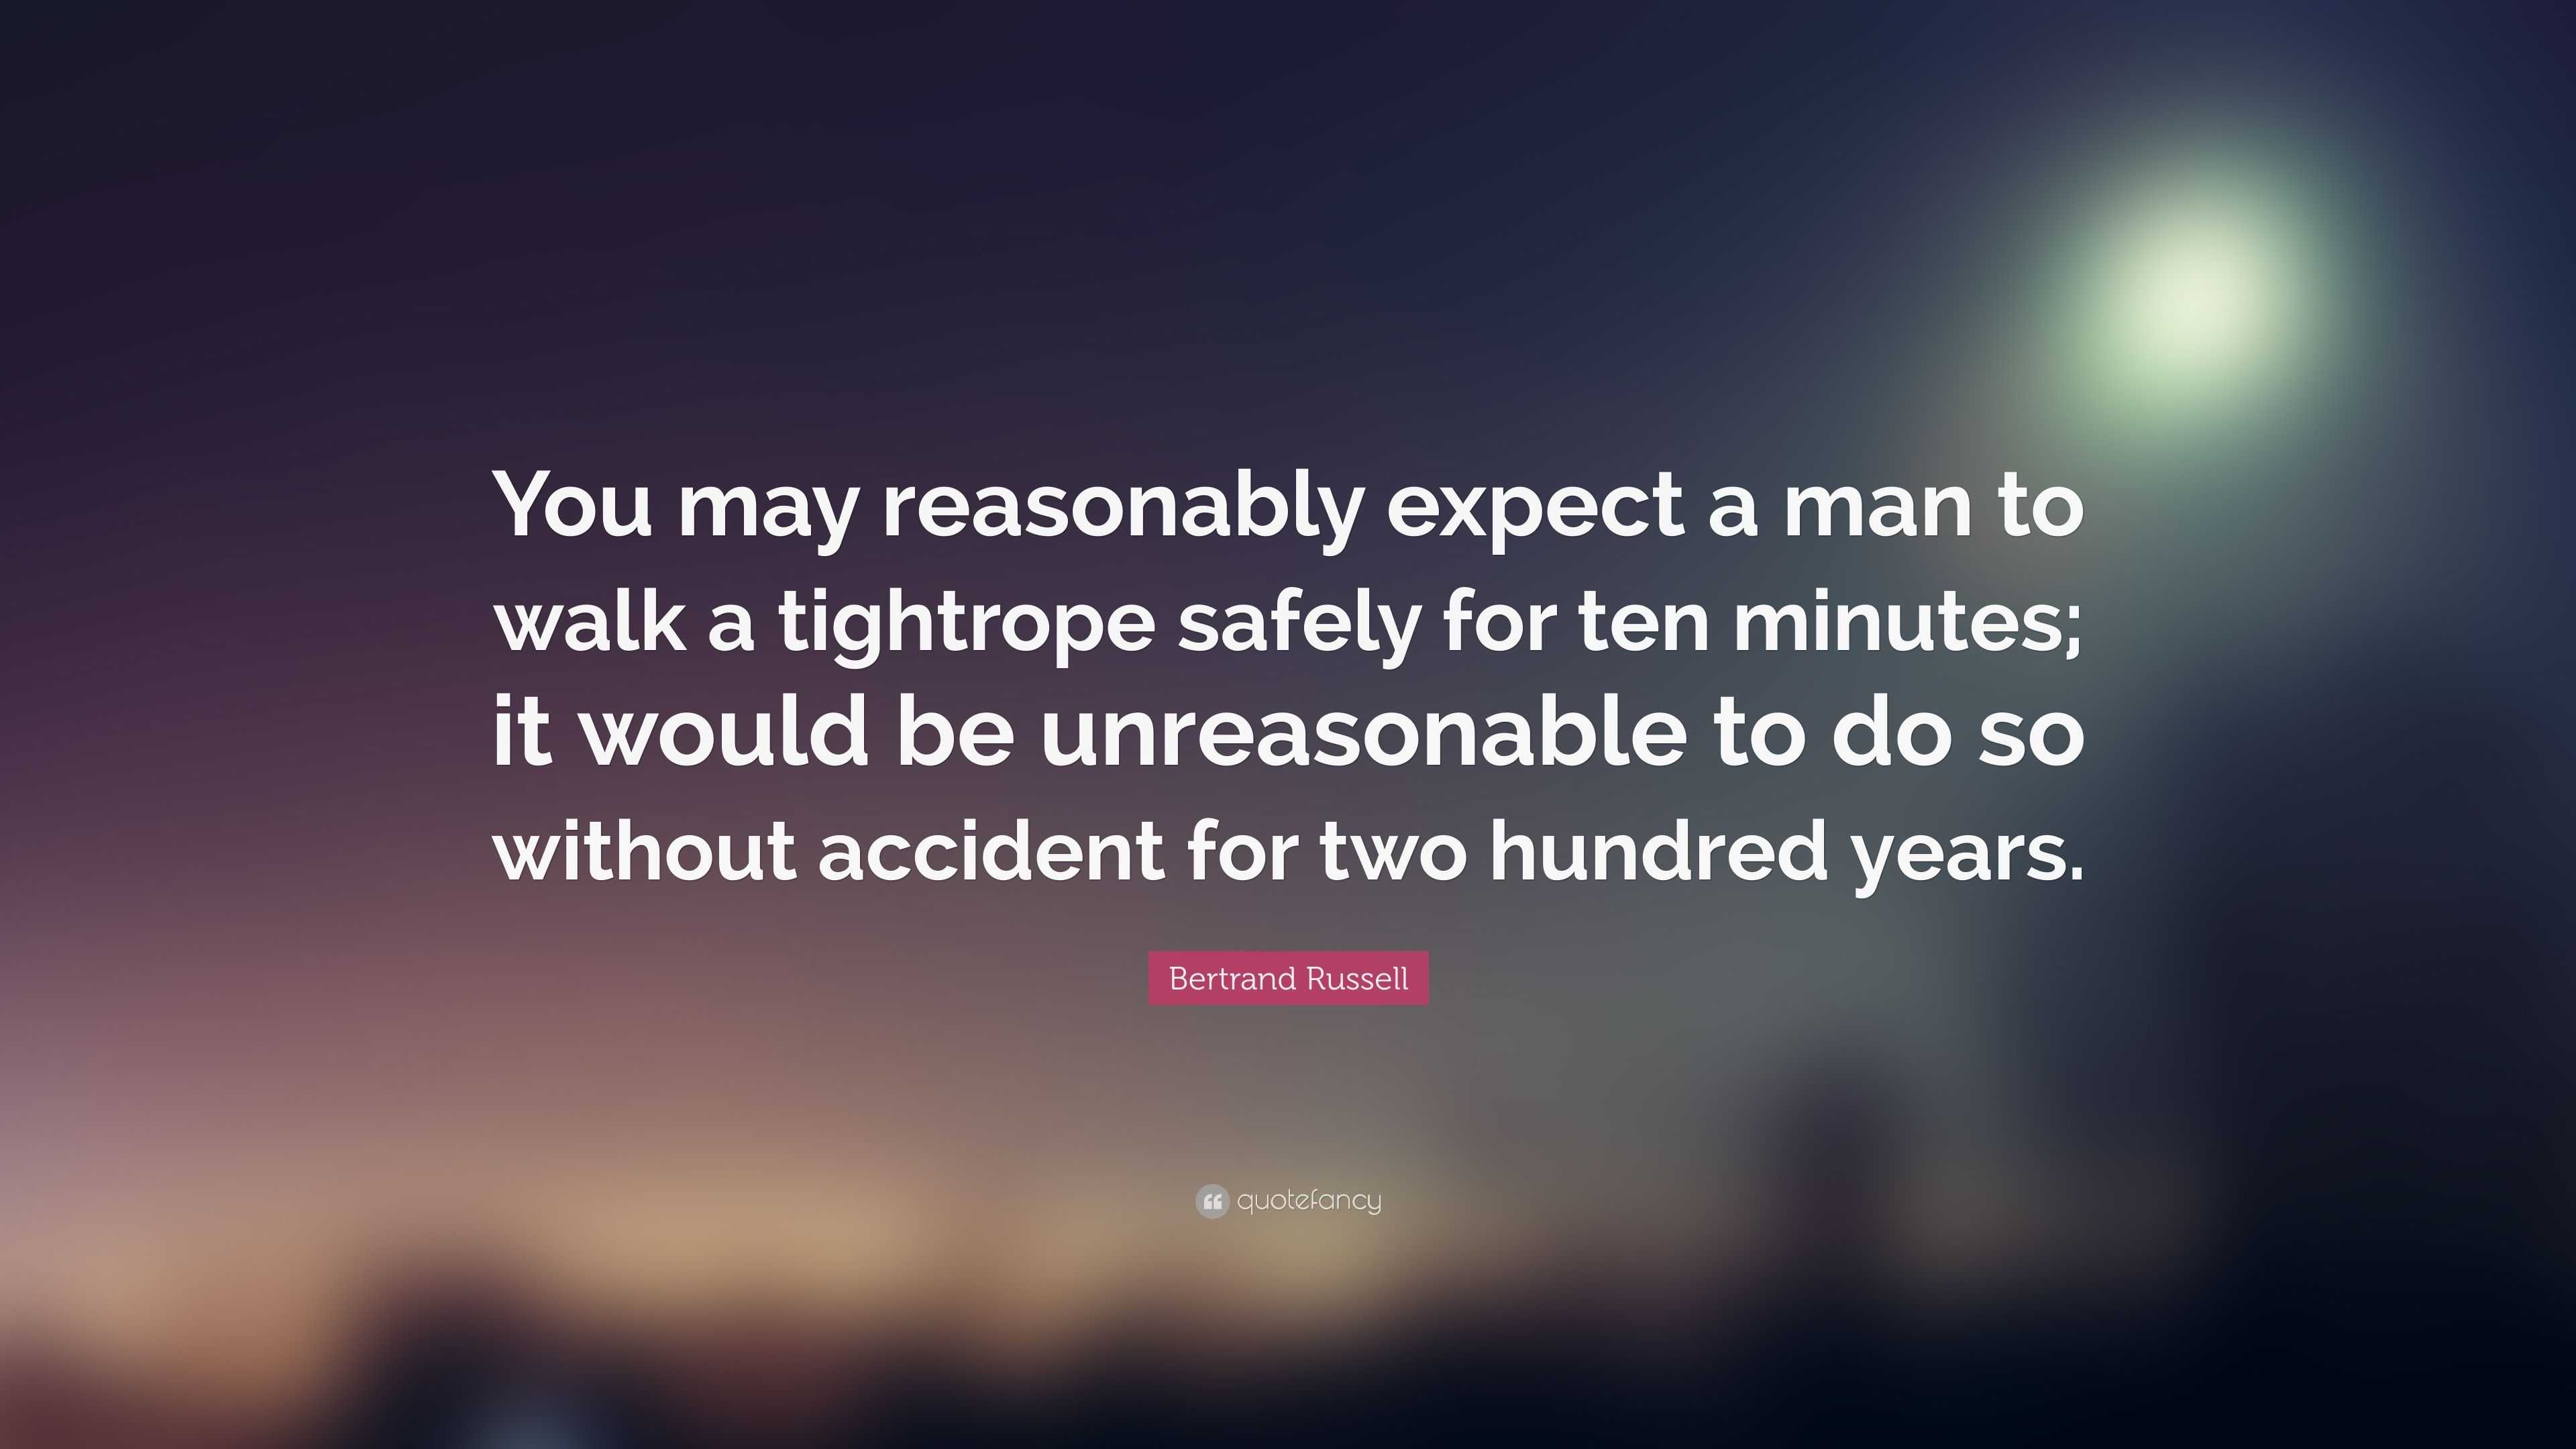 Bertrand Russell Quote: “You may reasonably expect a man to walk a  tightrope safely for ten minutes; it would be unreasonable to do so without  ac”